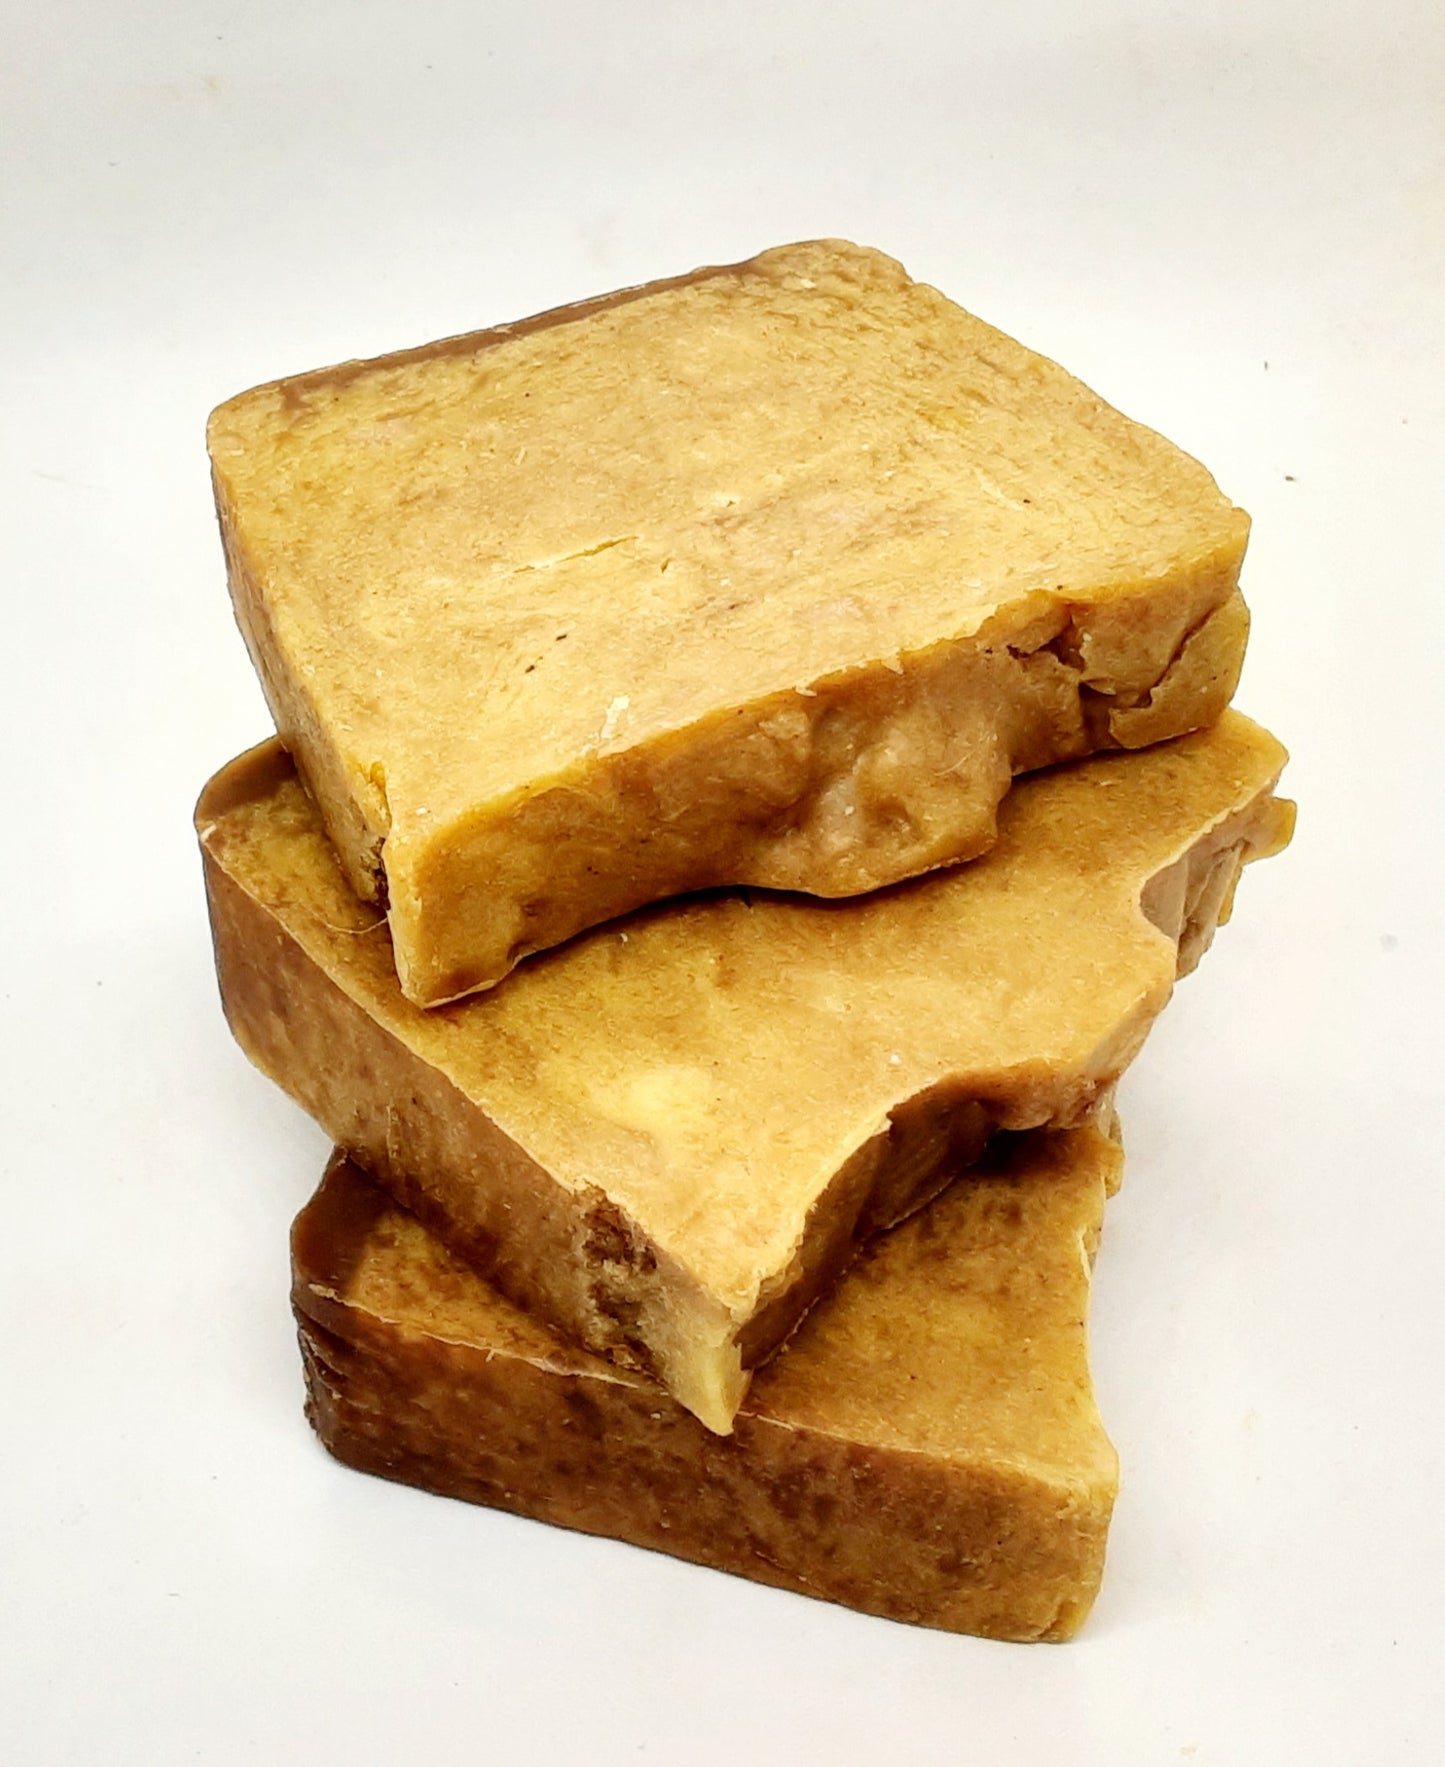 Hand Milled Dubious Monk Belgian Pale Ale Beer Soap - Soap with Spirit!  SLS & SLES Free, Vegan, Cruelty Free